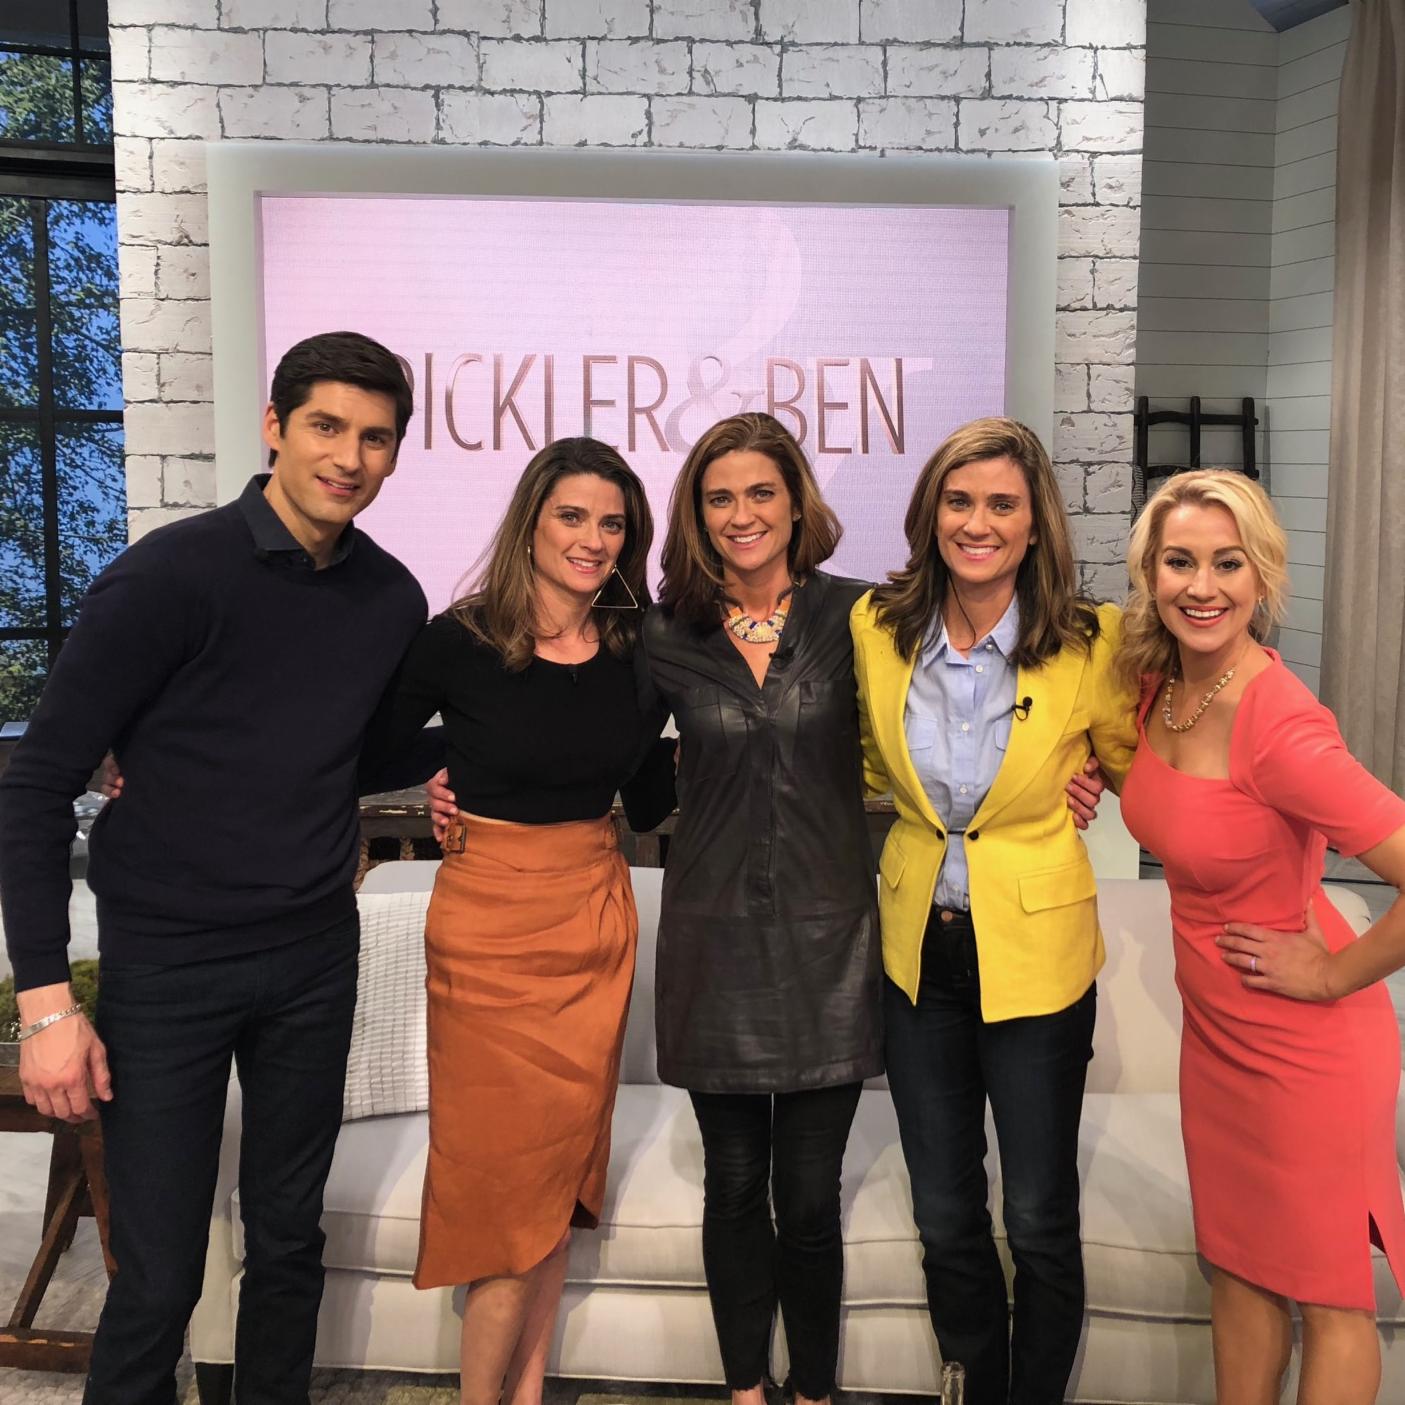 Live on National TV with The Pickler & Ben Show